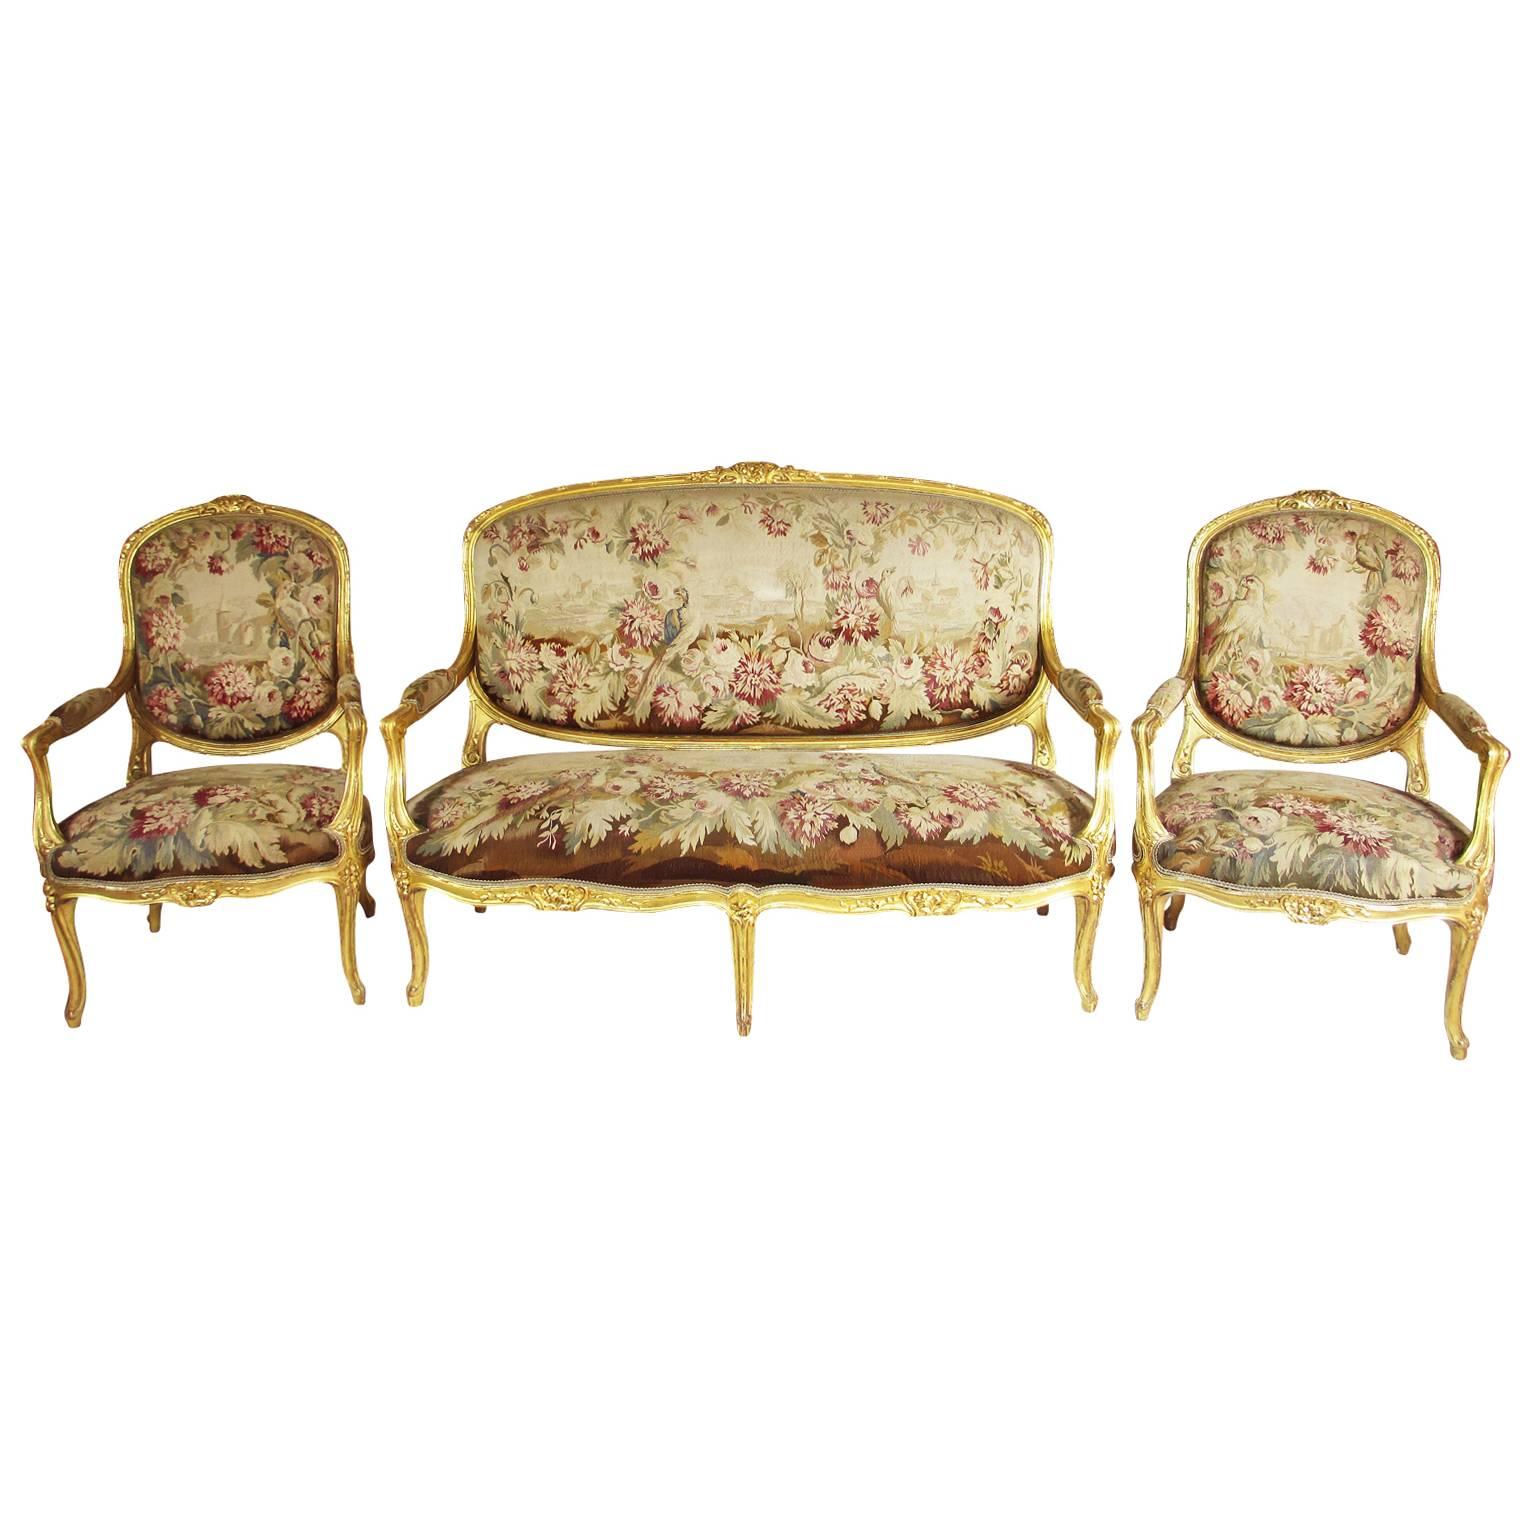 French 19th Century Louis XV Style Three-Piece Giltwood and Aubusson Salon Suite